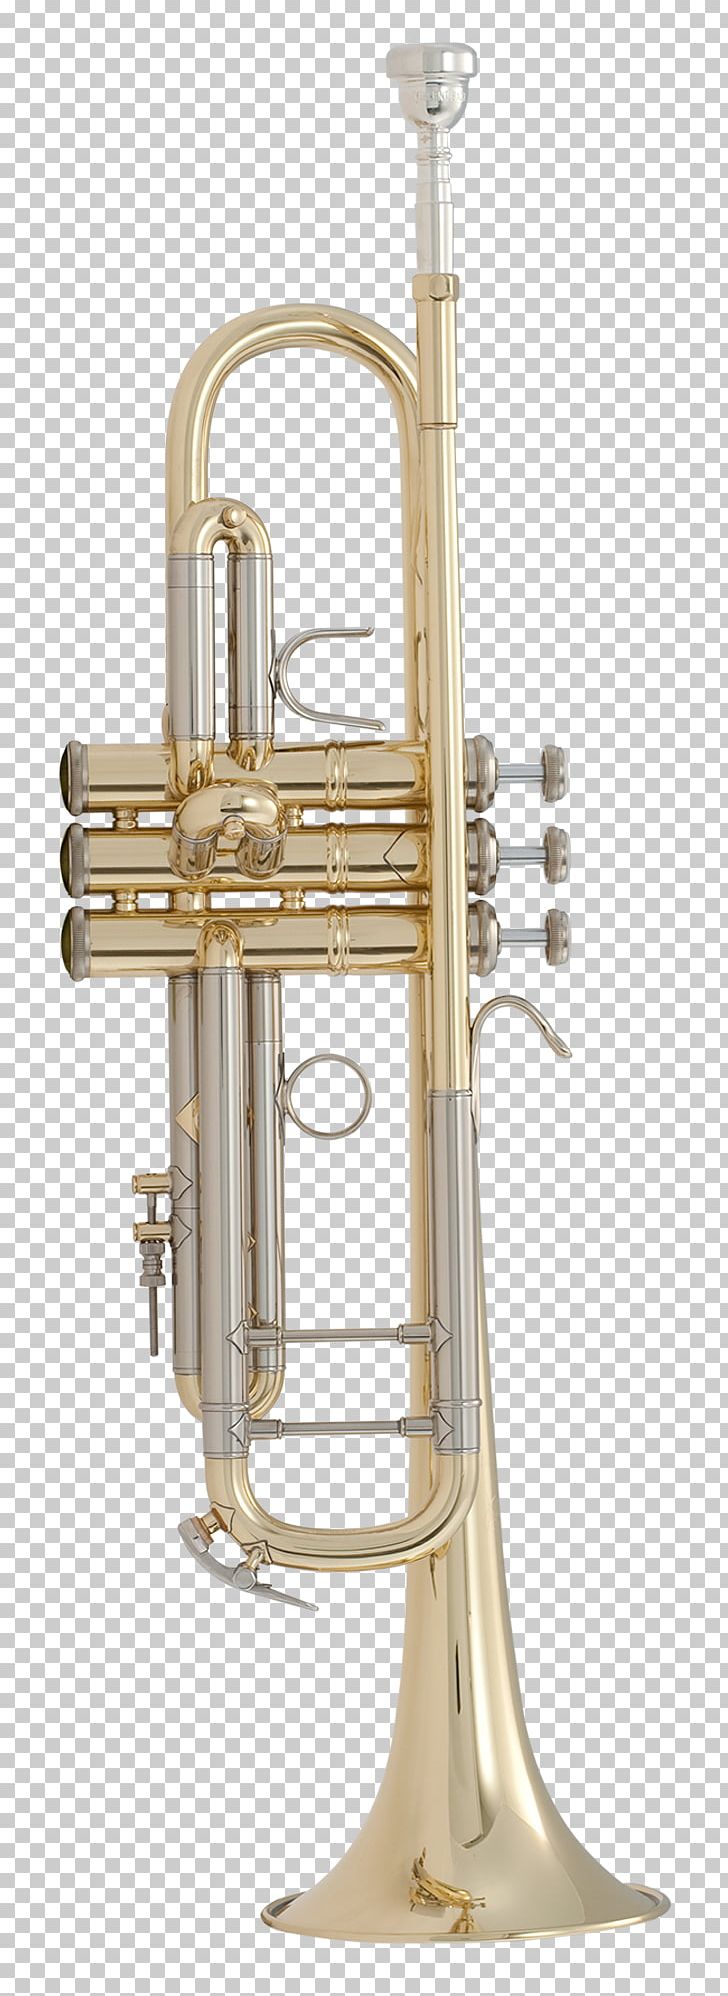 Trumpet Vincent Bach Corporation Mouthpiece Brass Instruments Musical Instruments PNG, Clipart, Alto Horn, Bass Oboe, Brass, Brass Instrument, Brass Instruments Free PNG Download